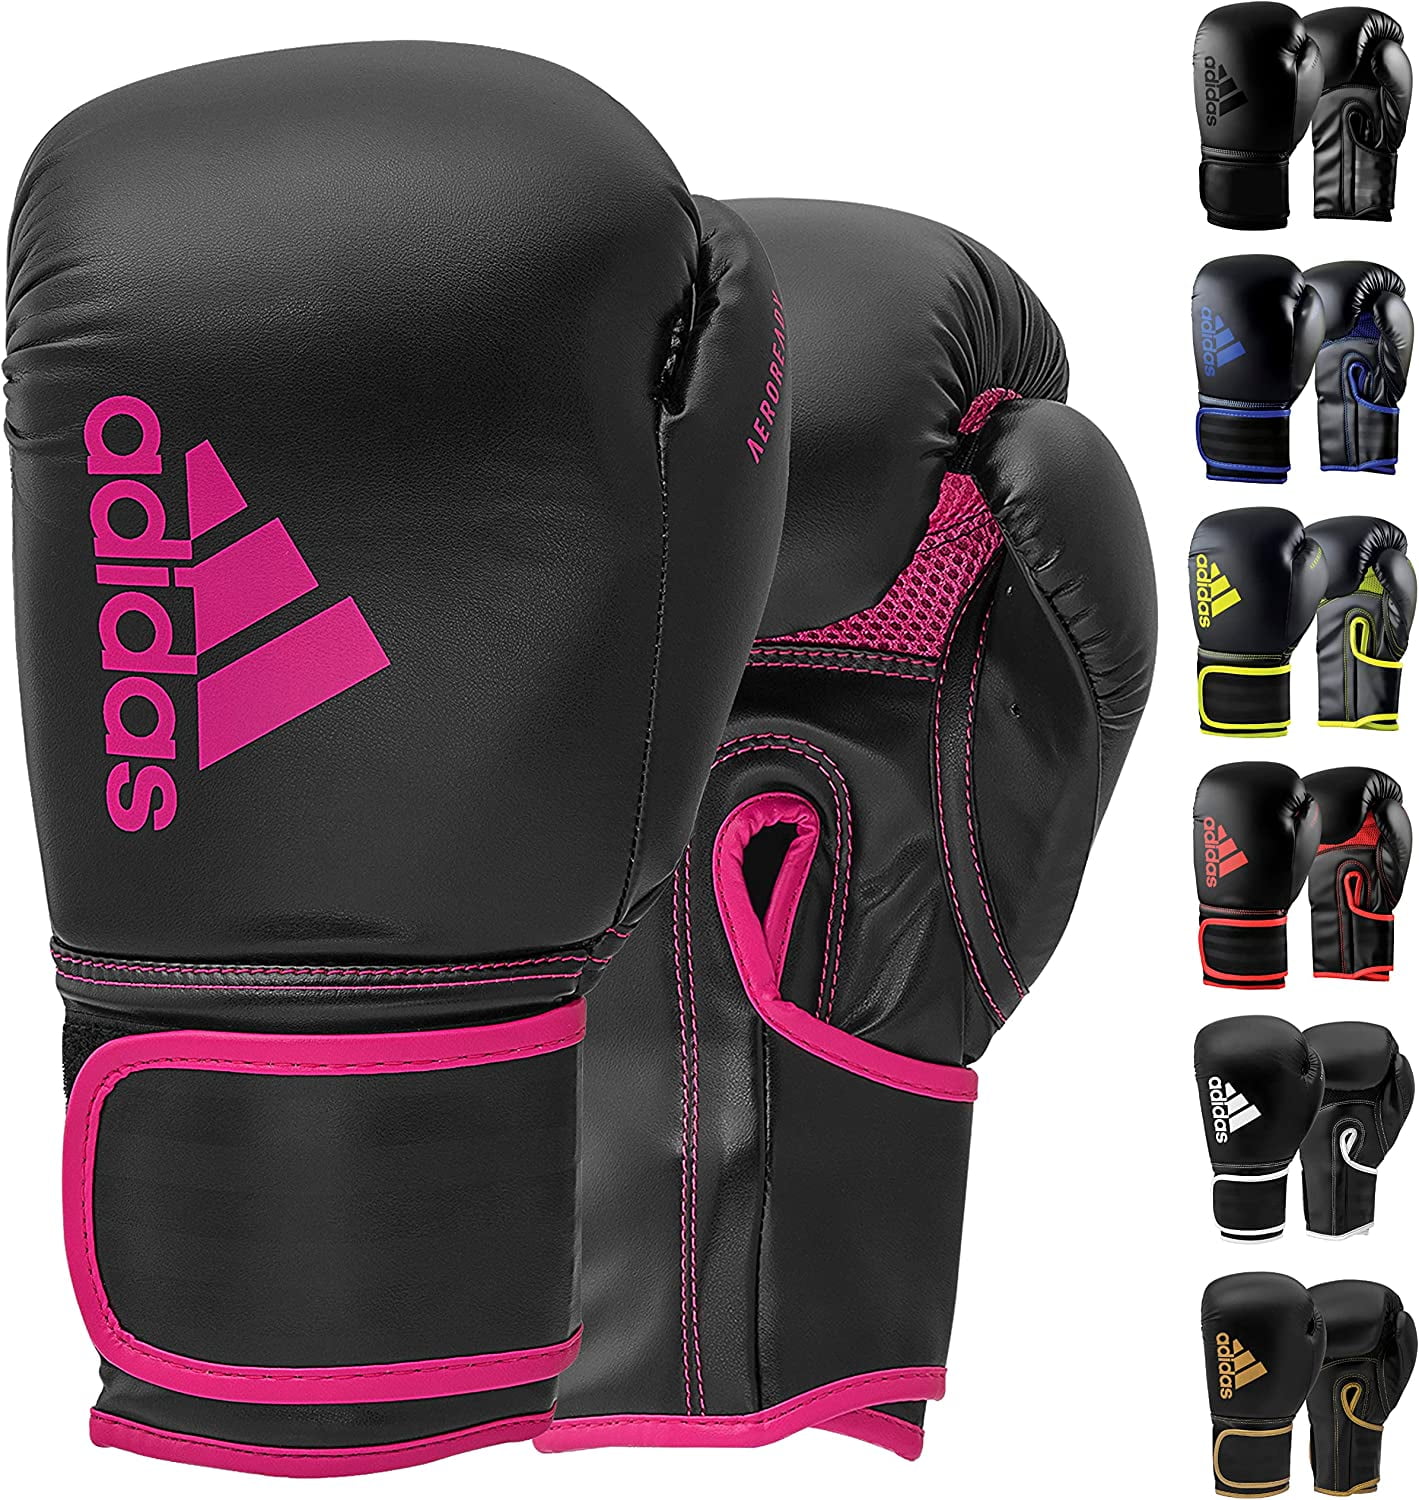 pair Kids Kickboxing Hybrid Women Sparring for set 8oz - for 80 Blac/Pink, Gloves, Training Men, - Boxing and Gloves Gloves - Adidas